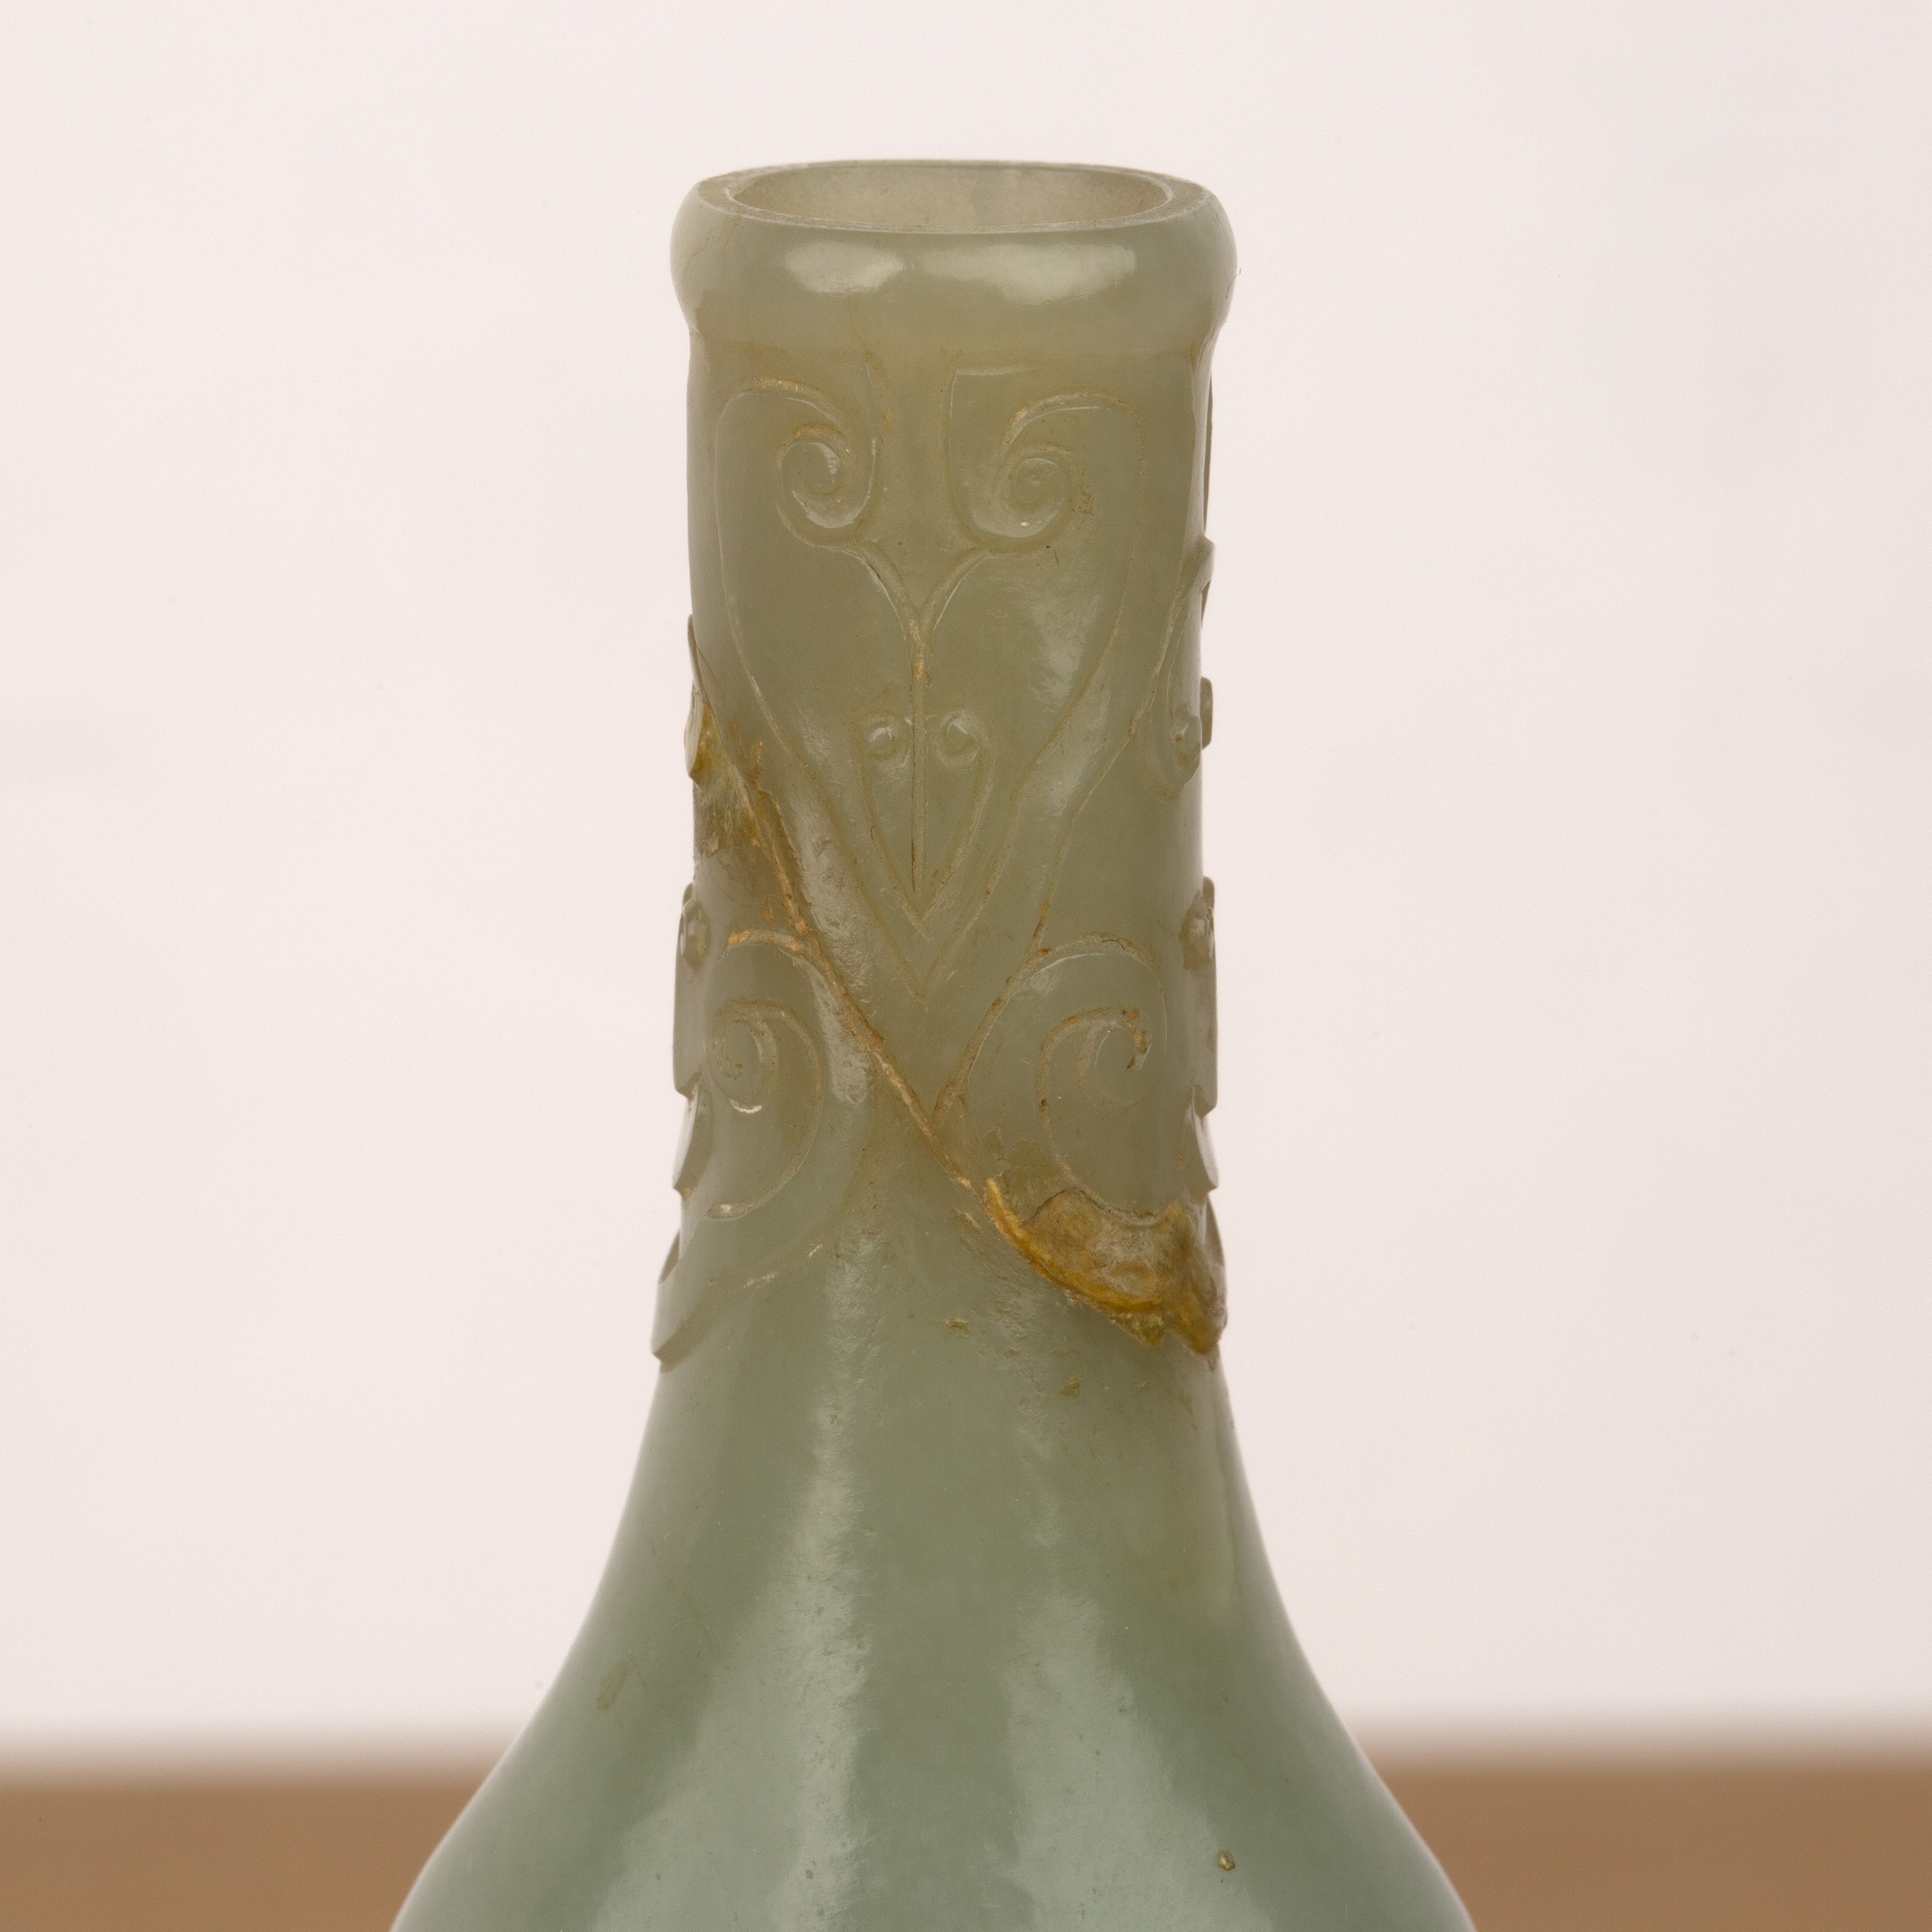 Small jade miniature vase on a wood stand Chinese, 18th/19th Century carved with flowers and - Image 3 of 10